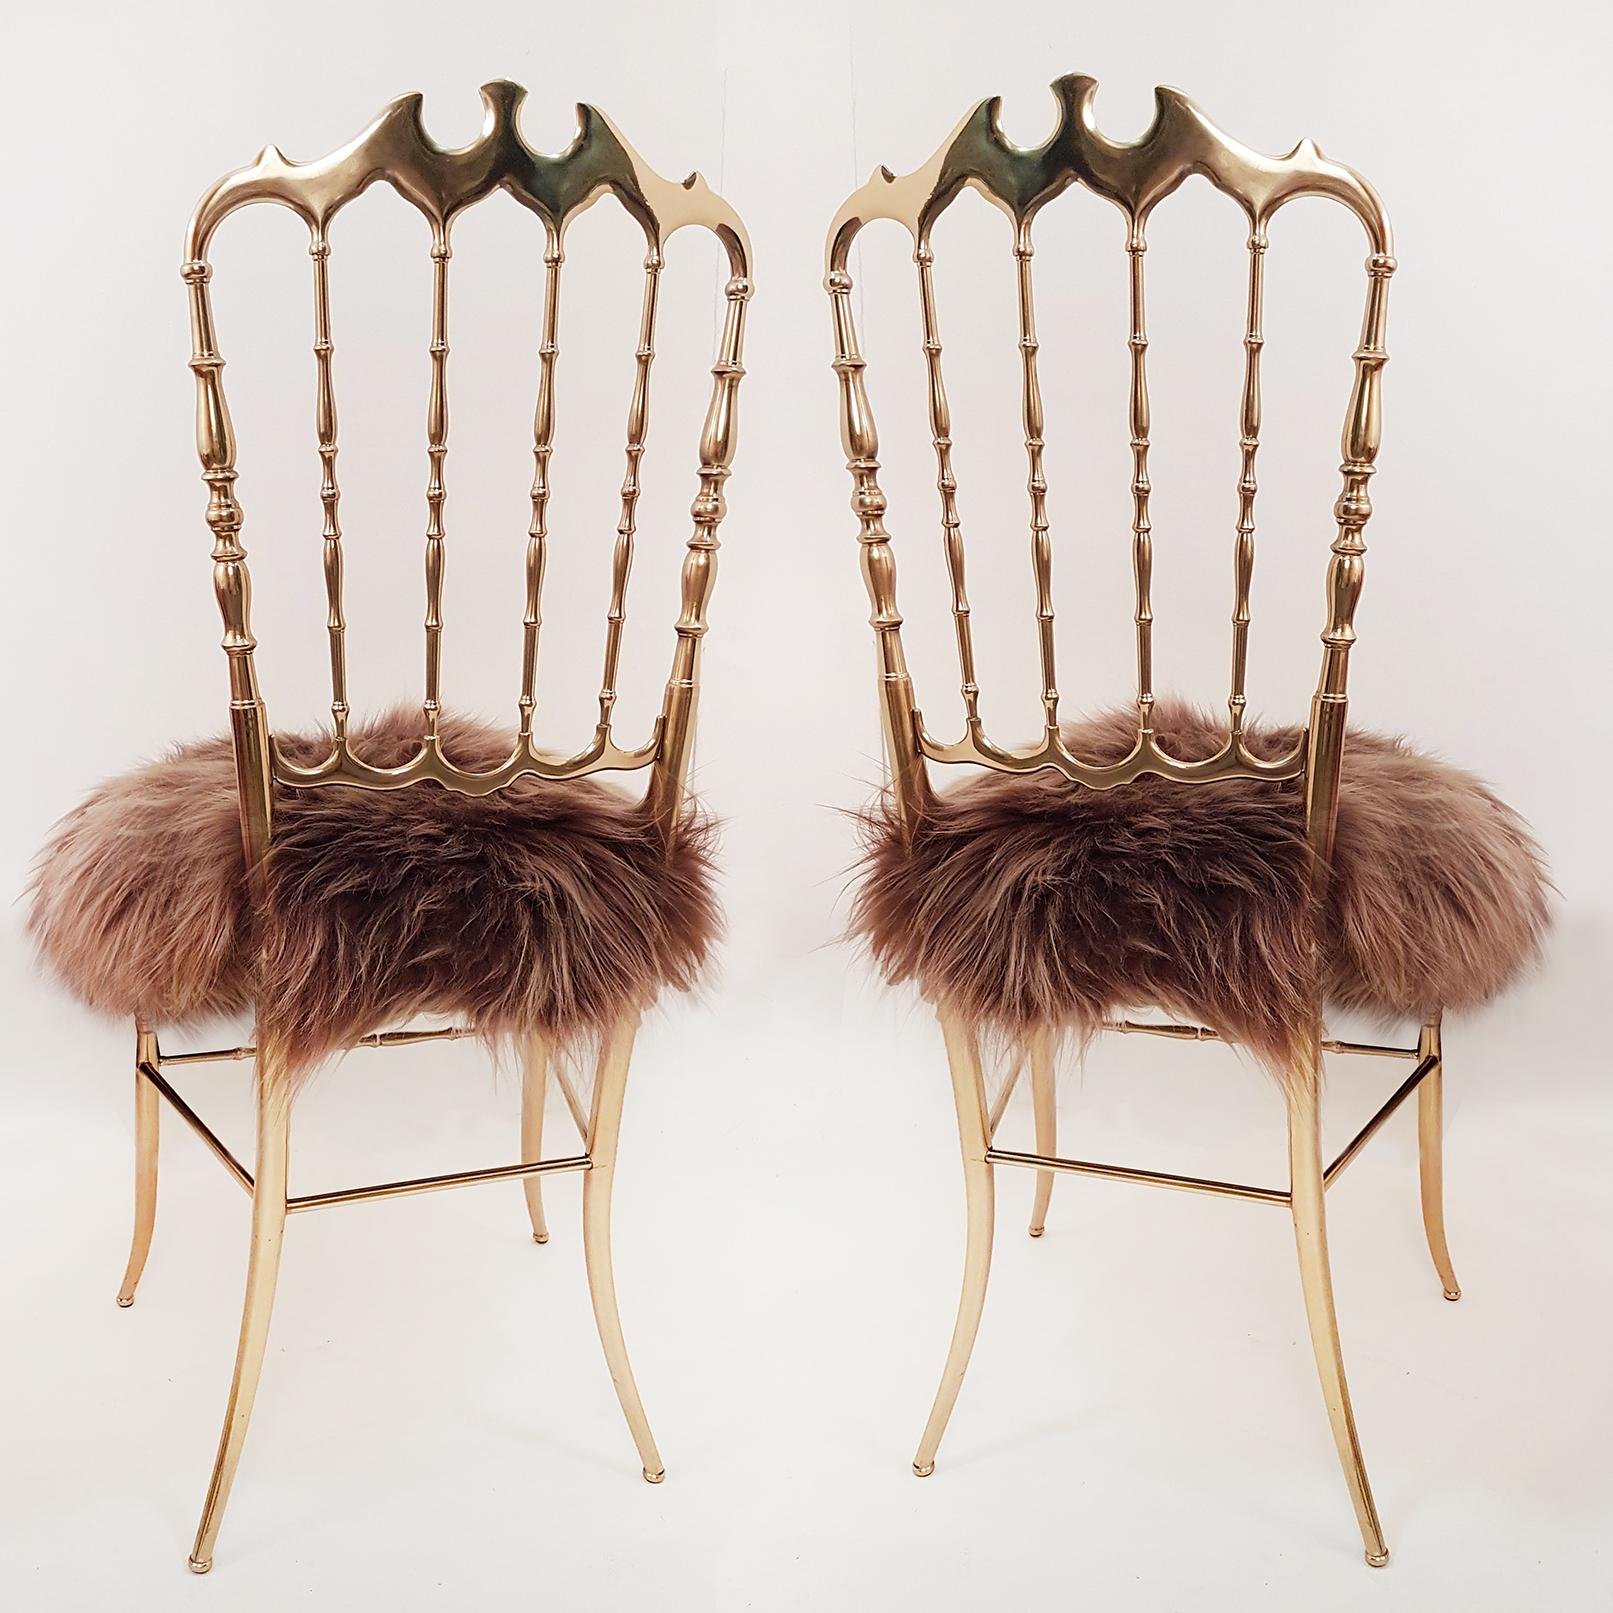 Pair of Italian Massive Brass Chairs by Chiavari, Upholstery Iceland Wol In Good Condition For Sale In Rijssen, NL